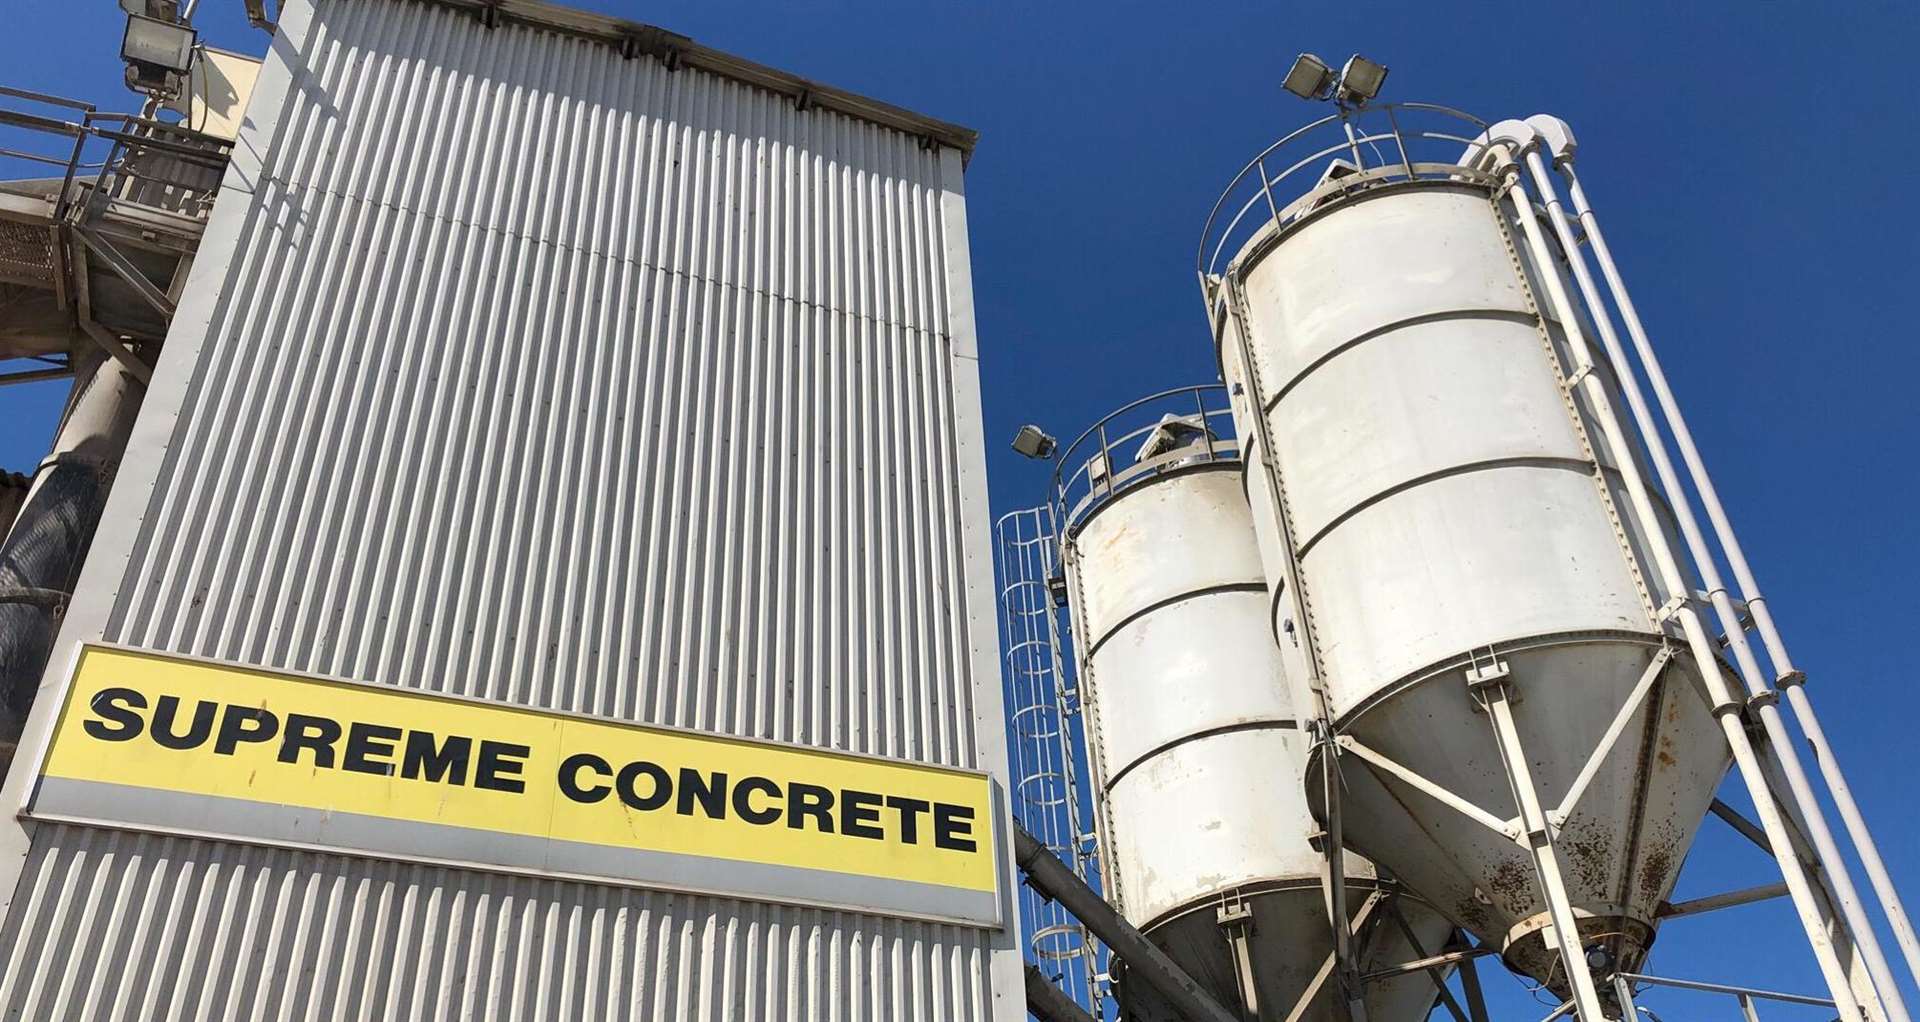 Supreme Concrete is to benefit from a major investment programme (4314105)